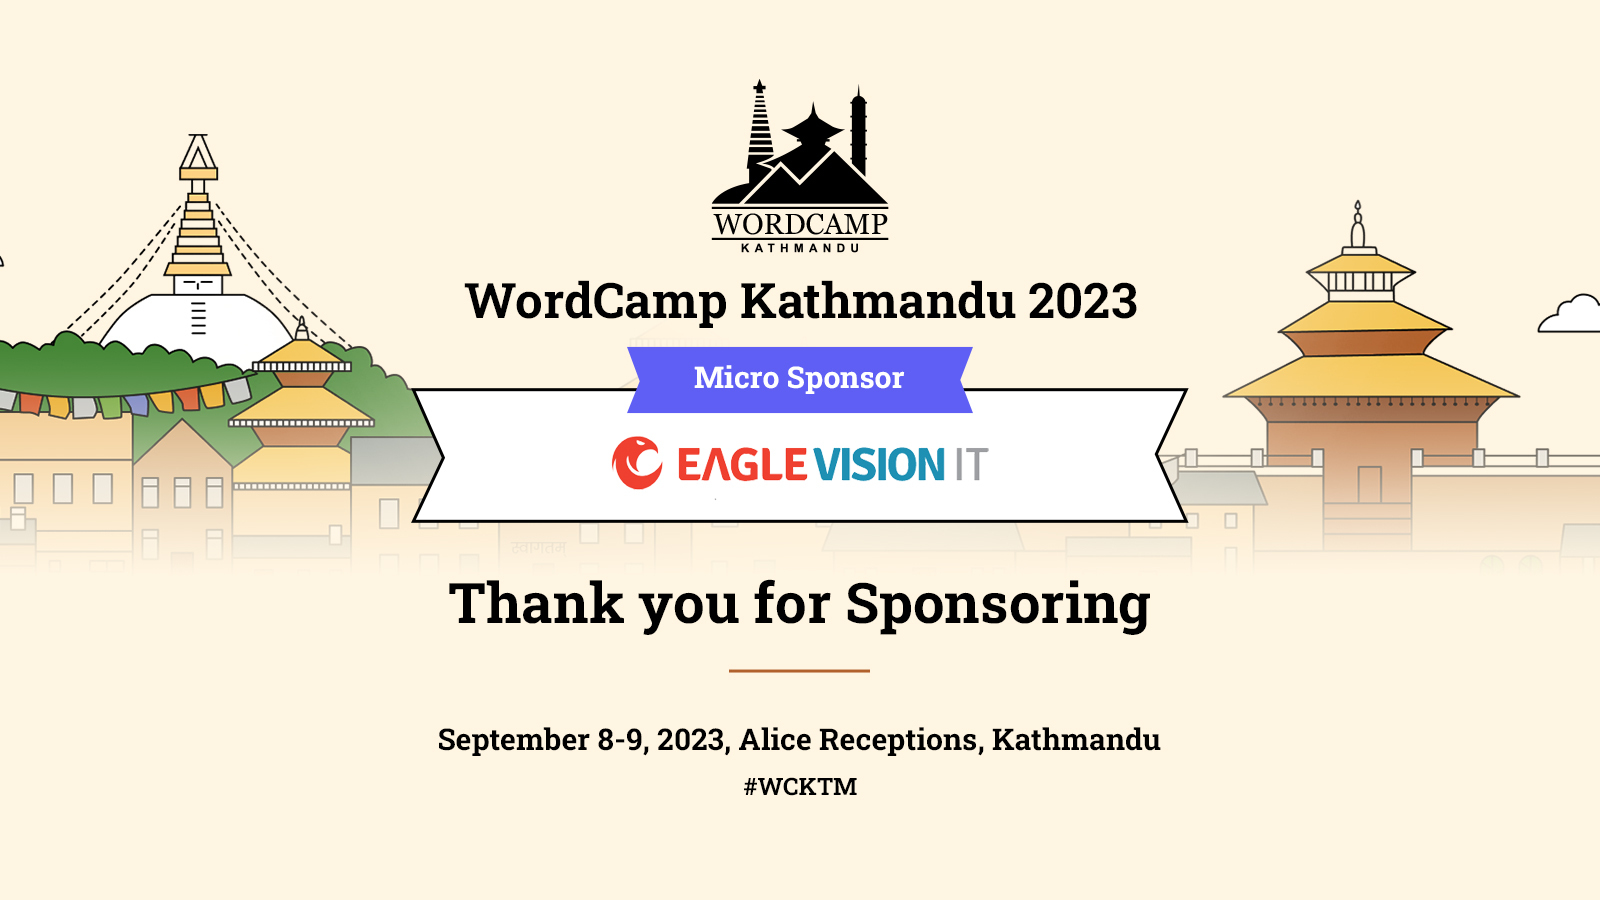 Thank you Eagle Vision IT for sponsoring